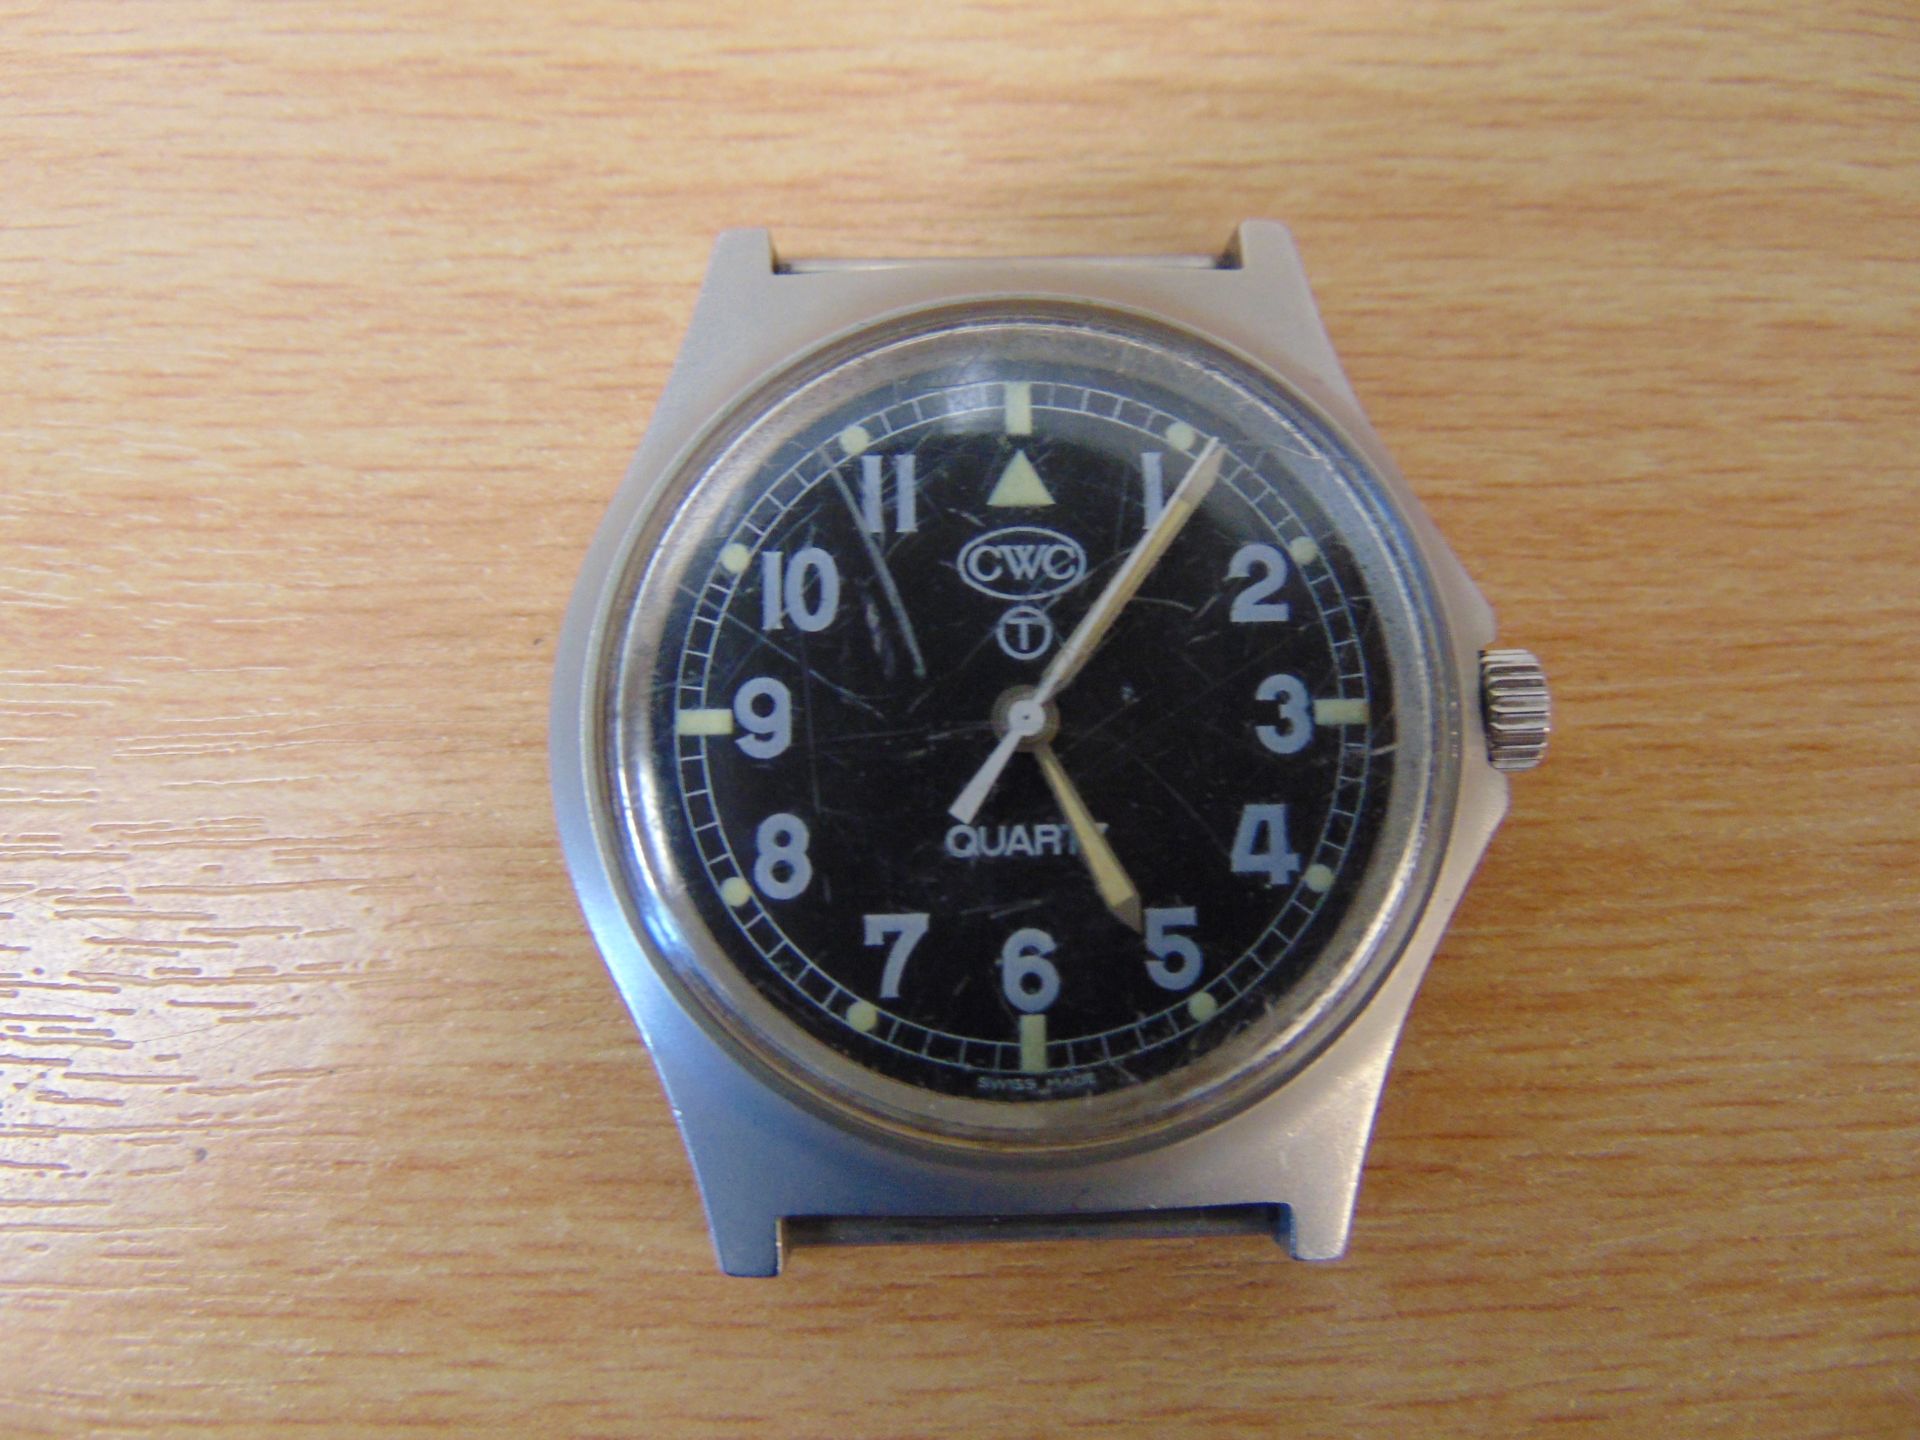 CWC 0552 Royal Marines / Navy issue service watch date 1990, GULF WAR 1 - Image 2 of 4